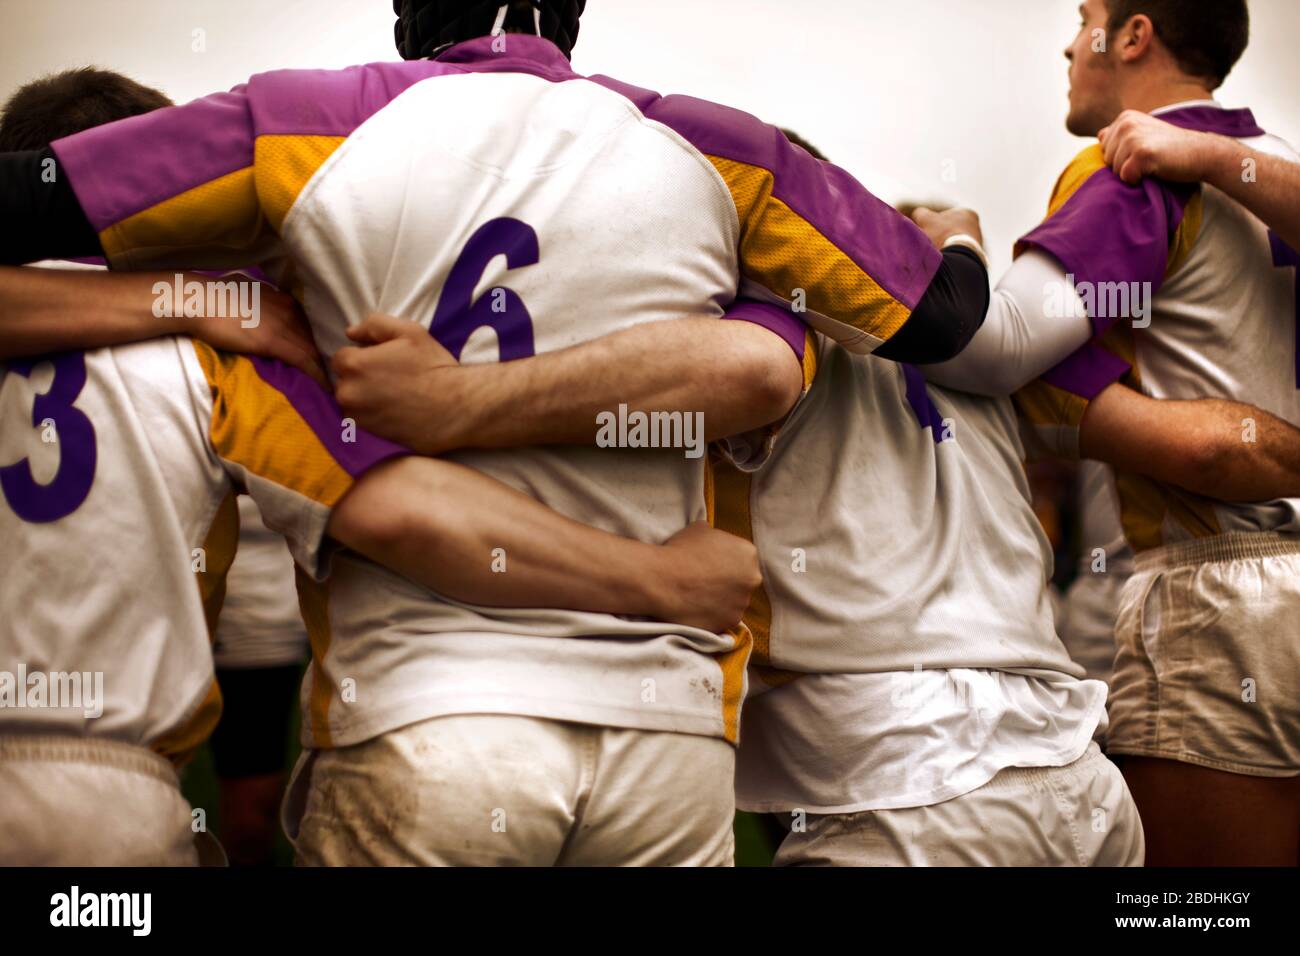 Rugby players preparing to go into a scrum. Stock Photo